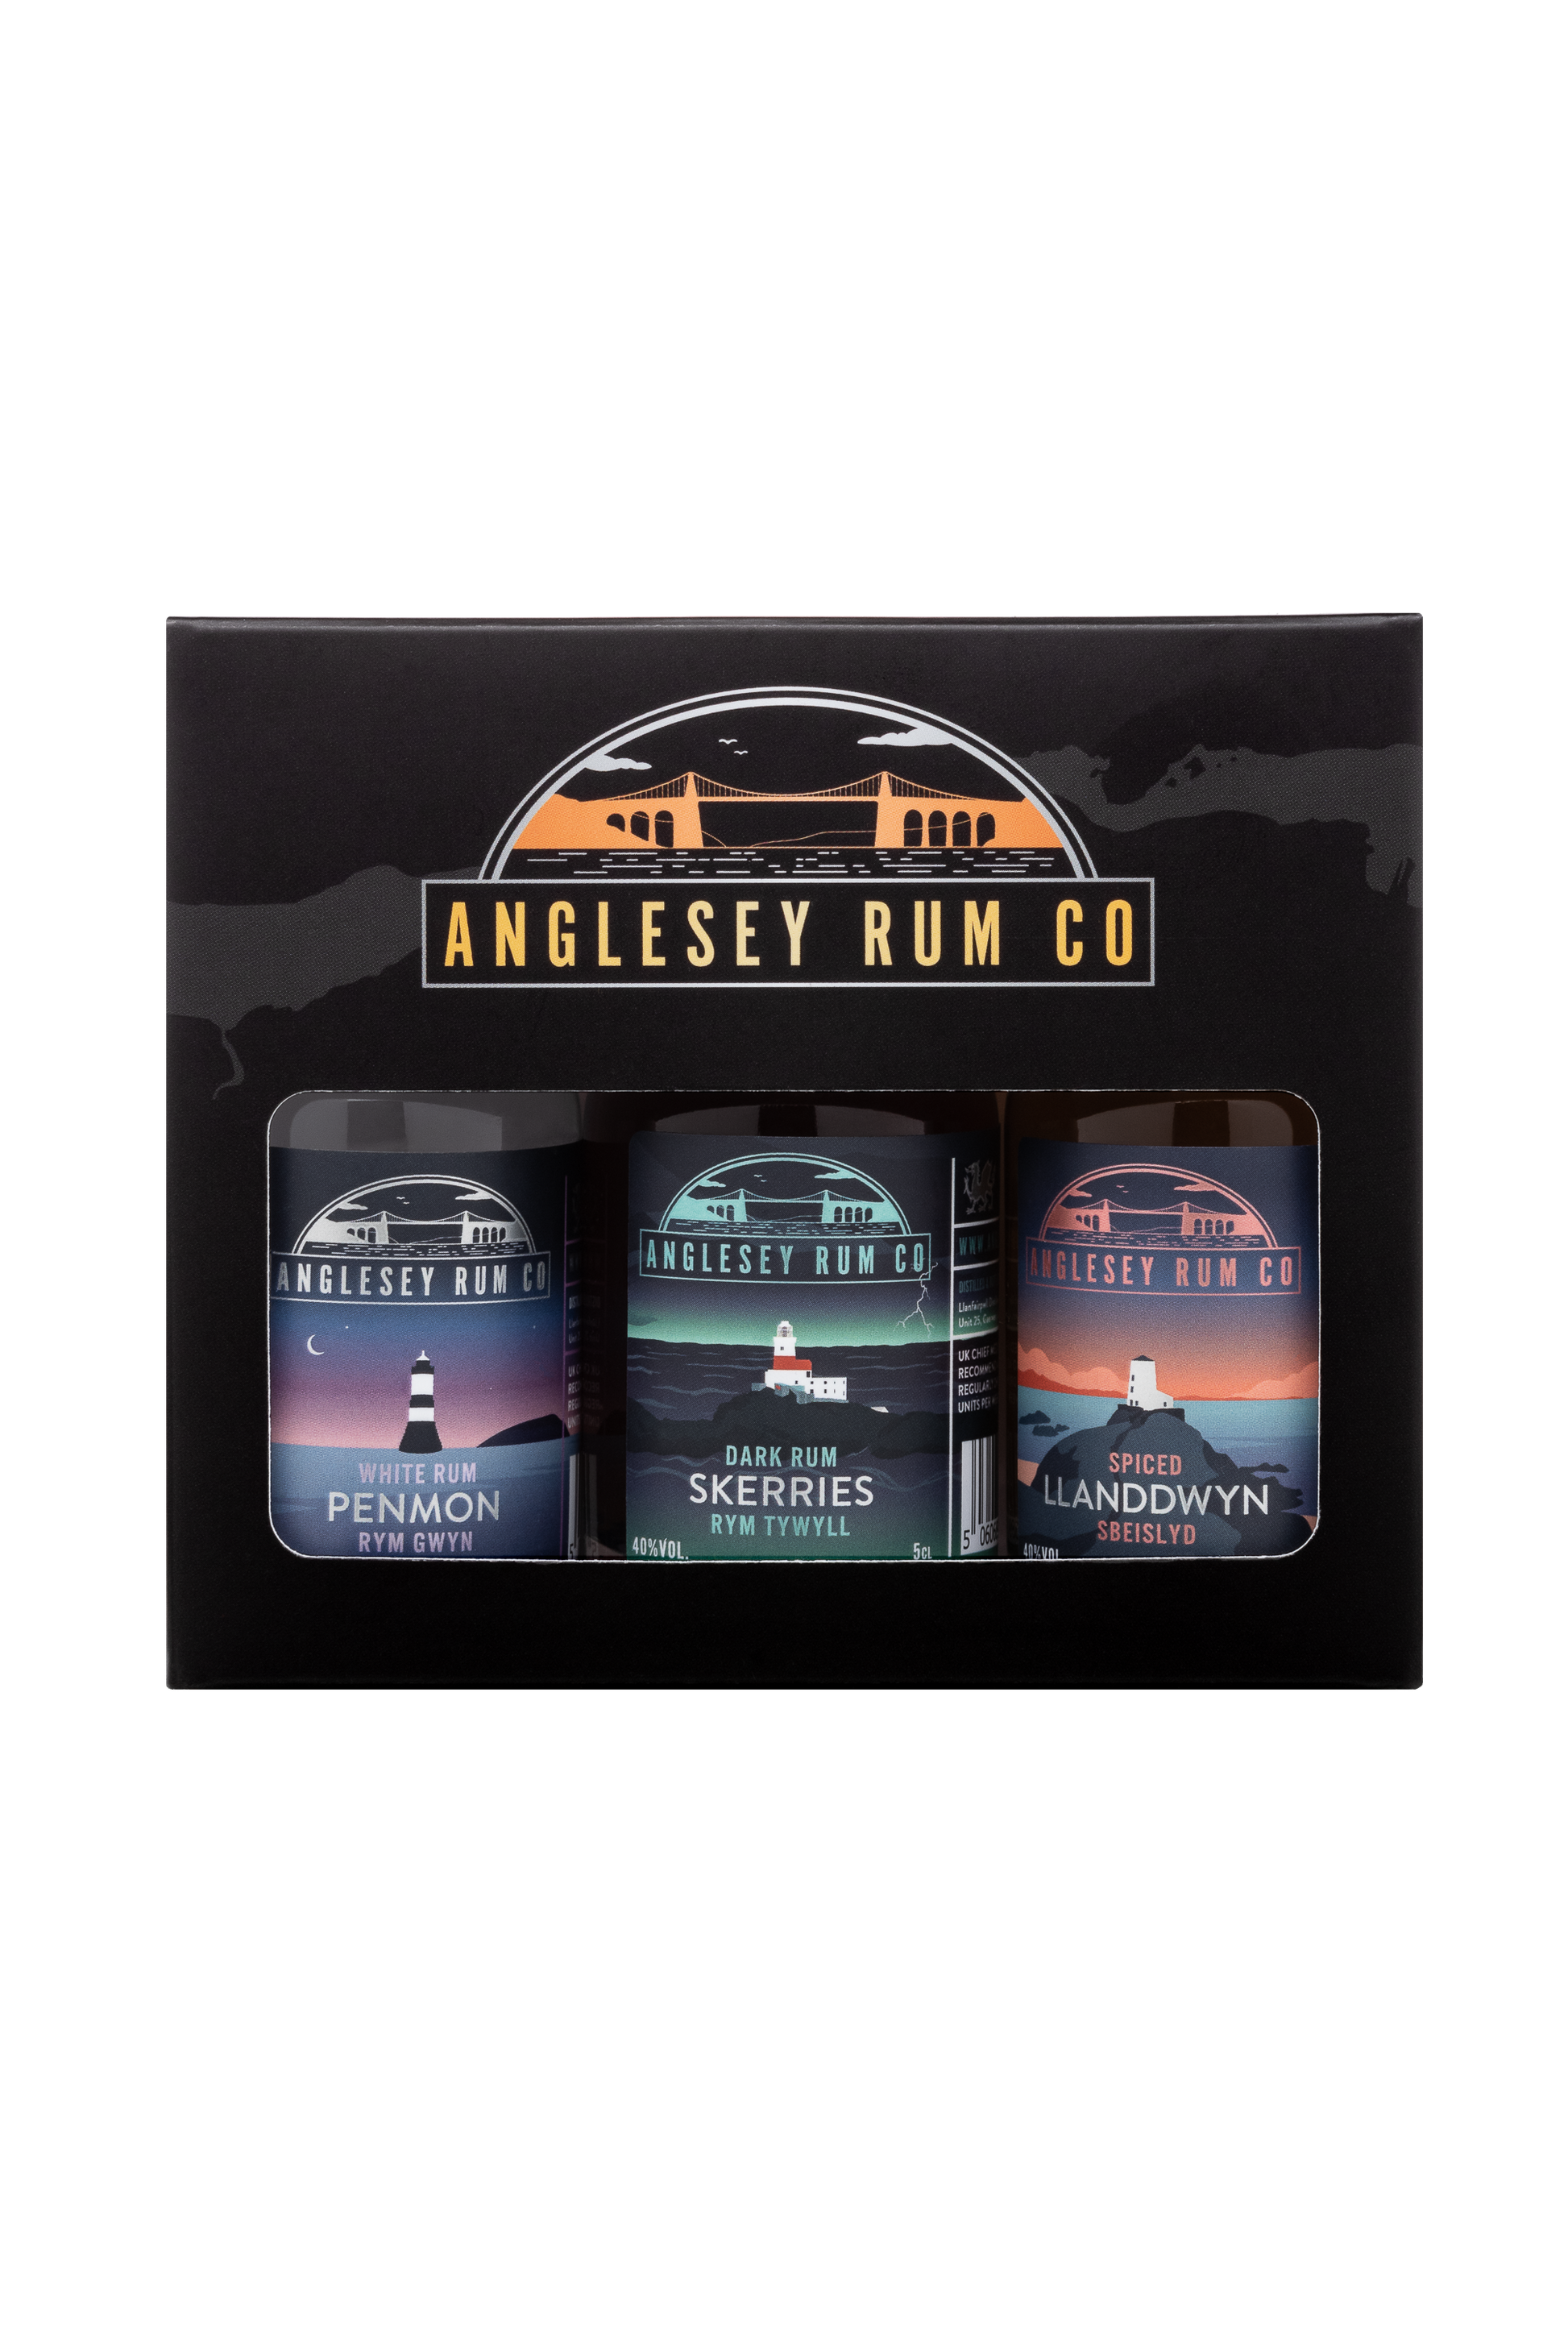 Anglesey Rum Co - Craft Welsh Rum - The Spirit of Wales